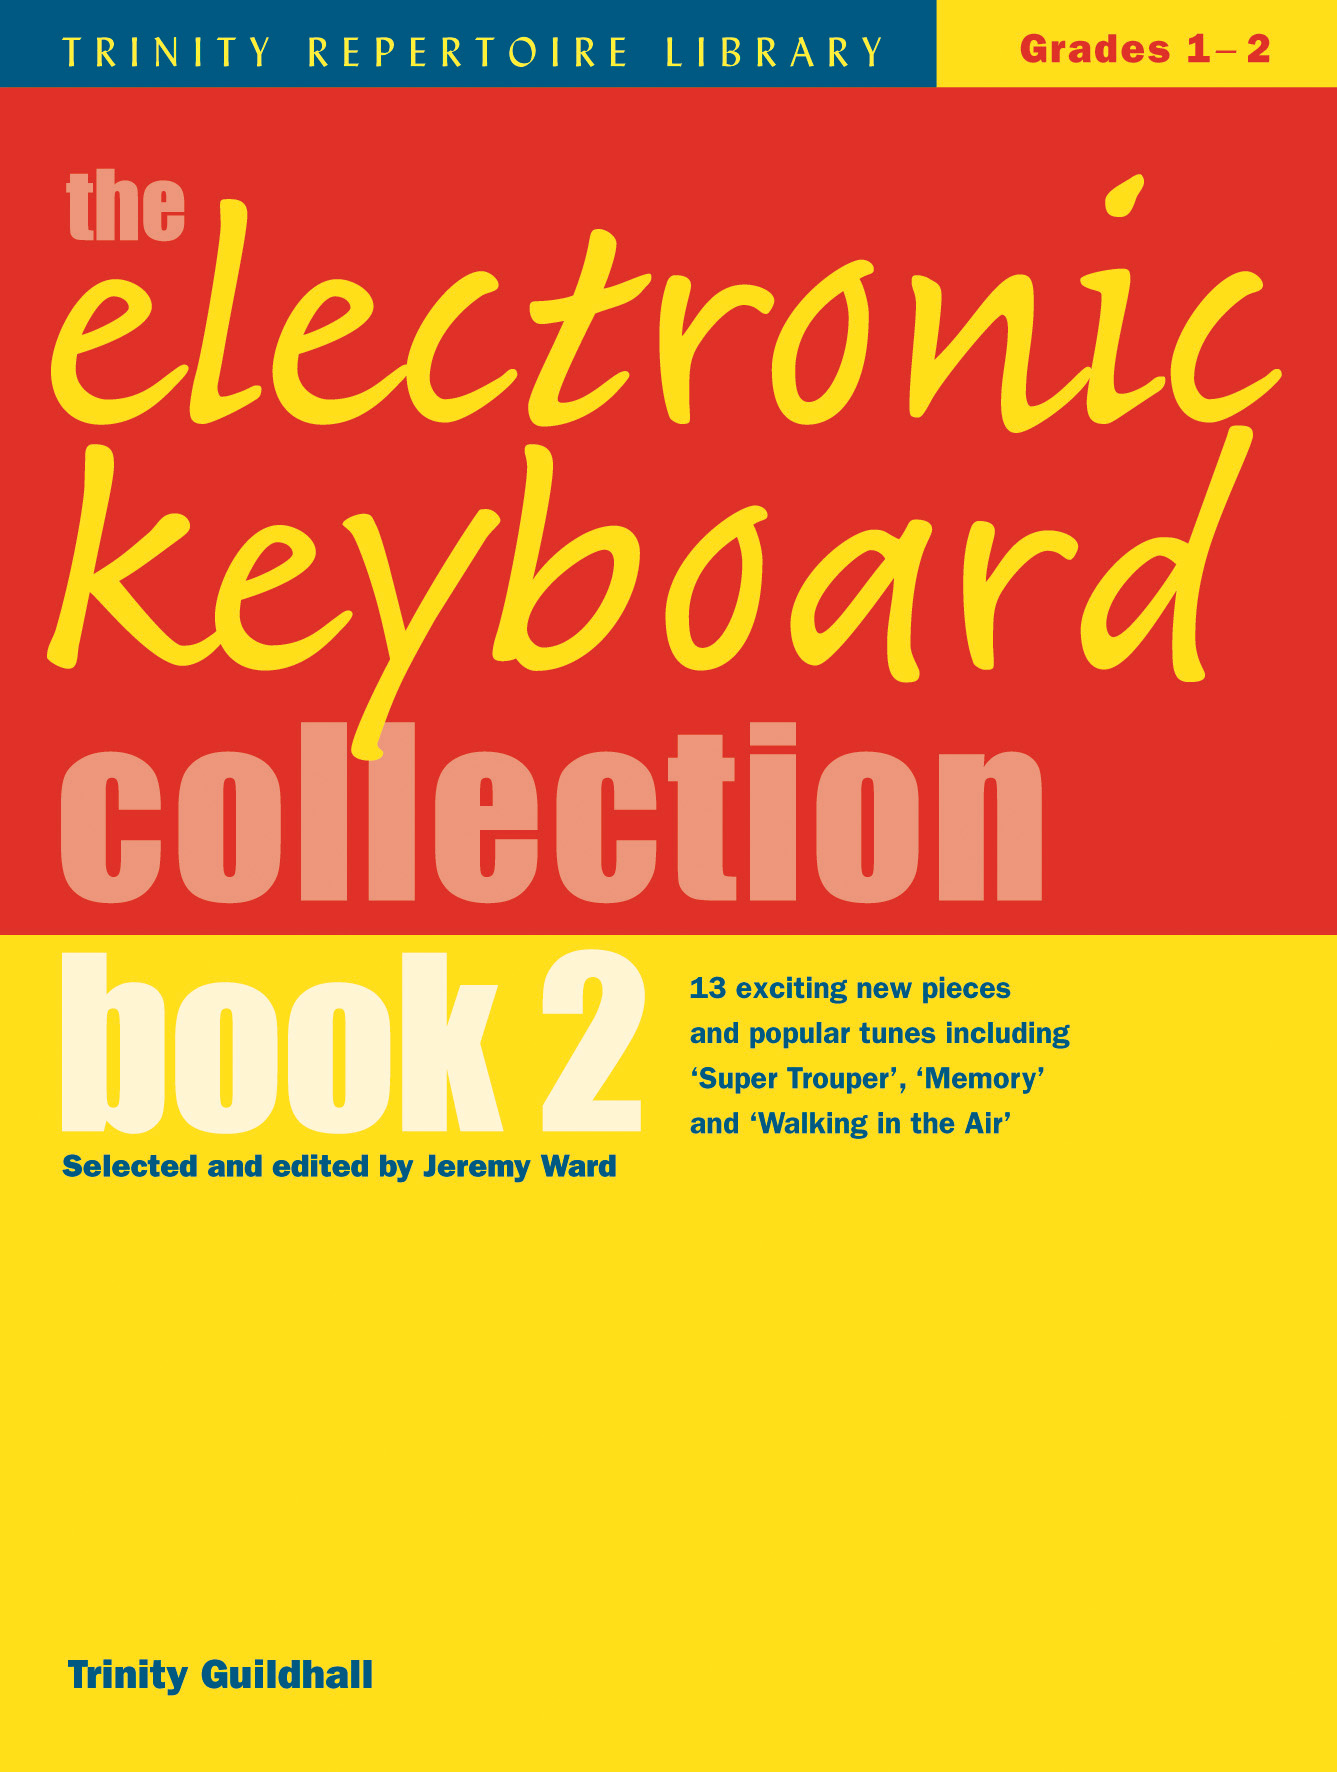 Electronic Keyboard Collection Book 2